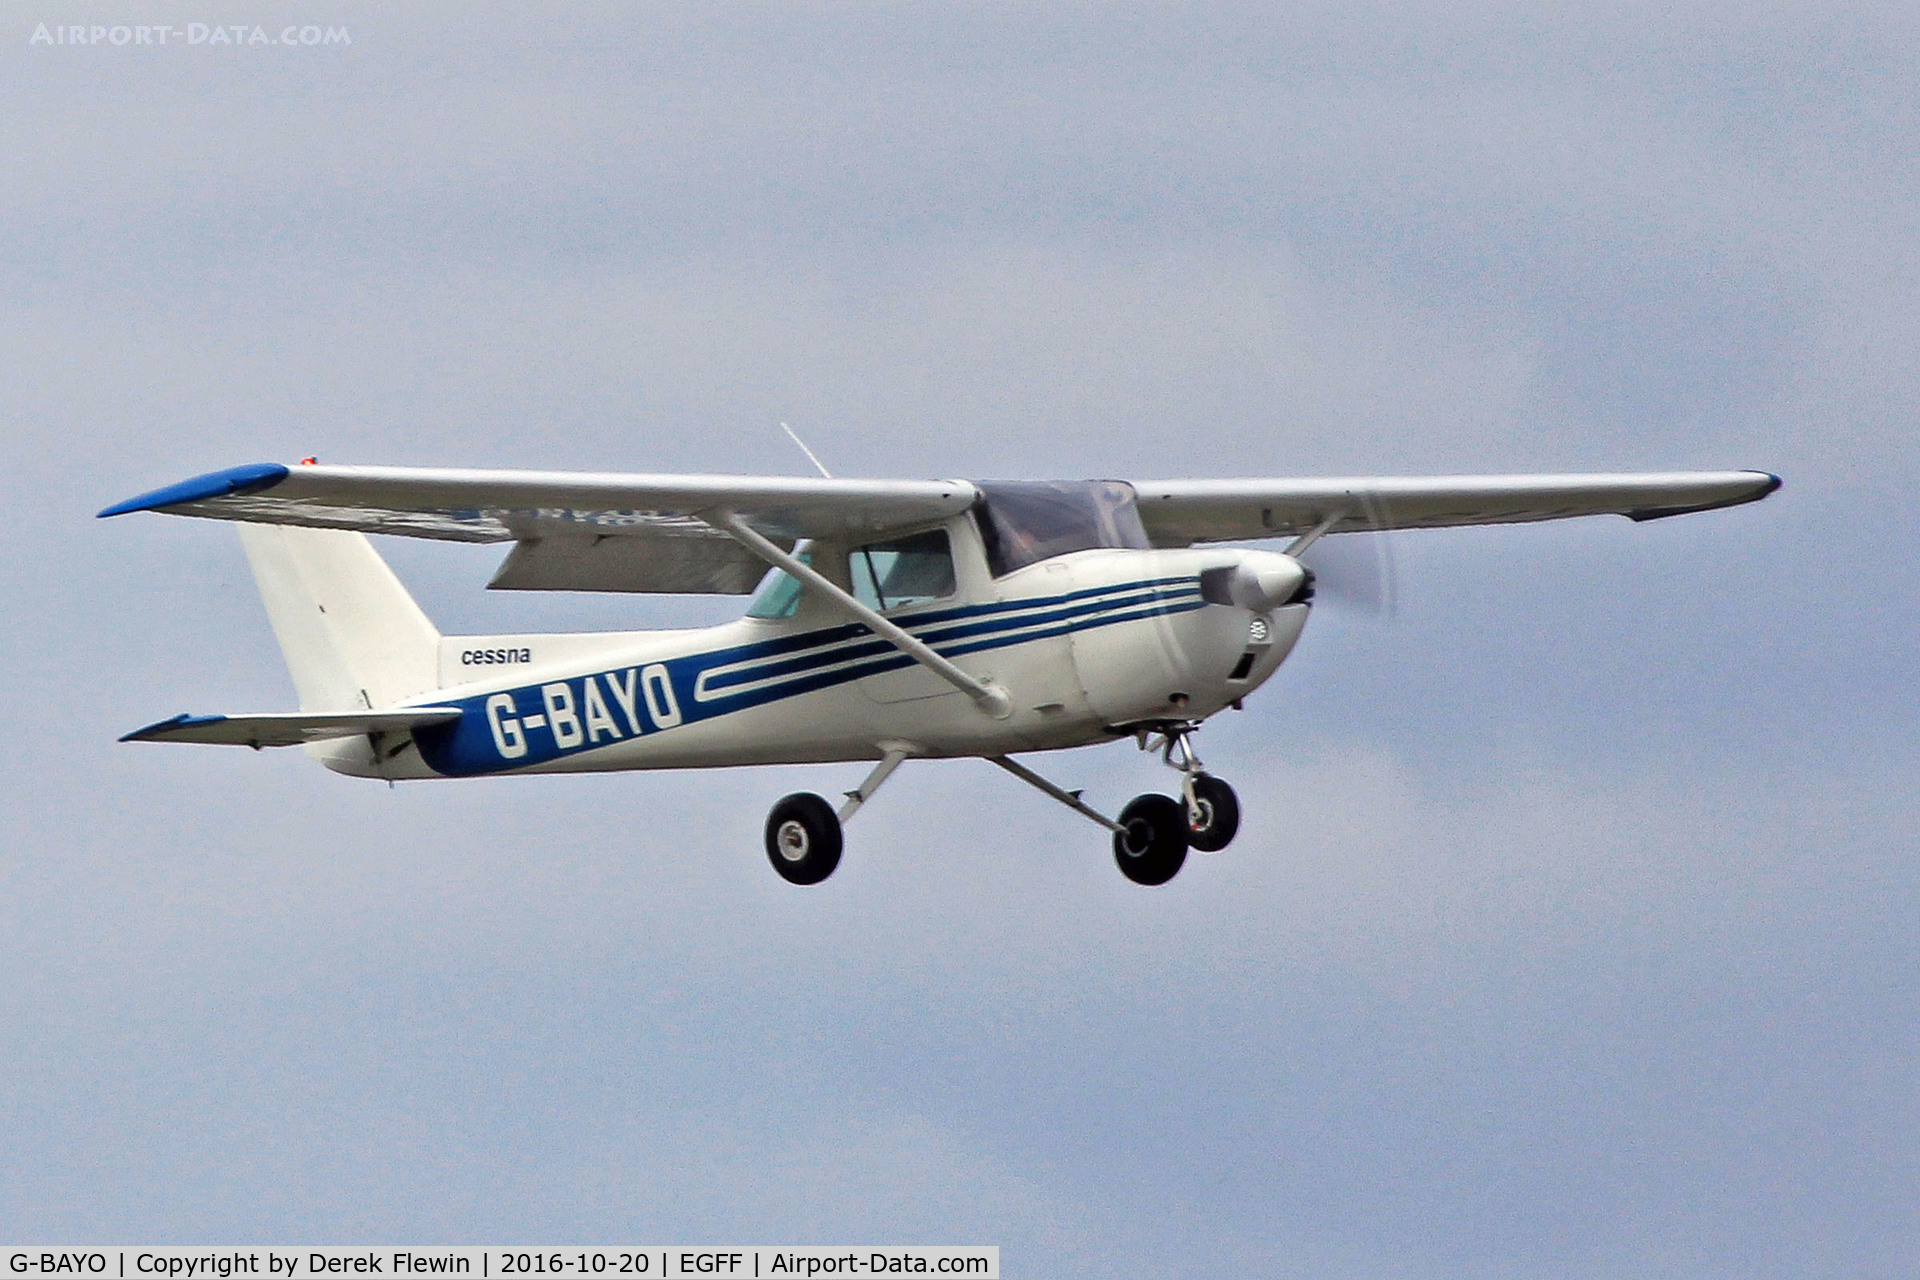 G-BAYO, 1973 Cessna 150L C/N 150-74435, 150L, Haverfordwest based, previously N19471, low approach and go-round runway 12.